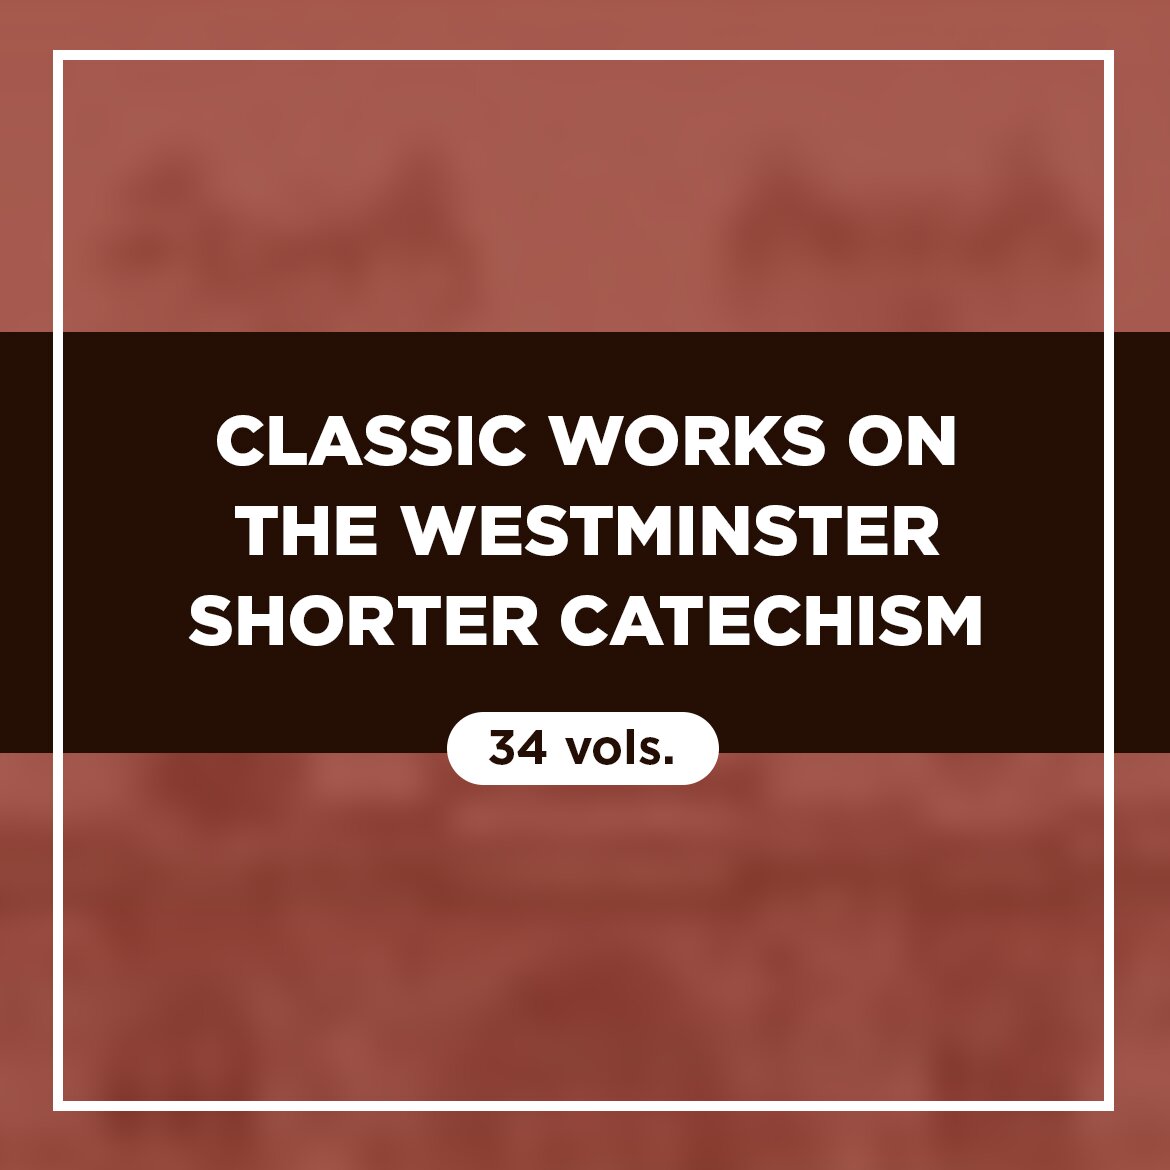 Classic Works on the Westminster Shorter Catechism (34 vols.)